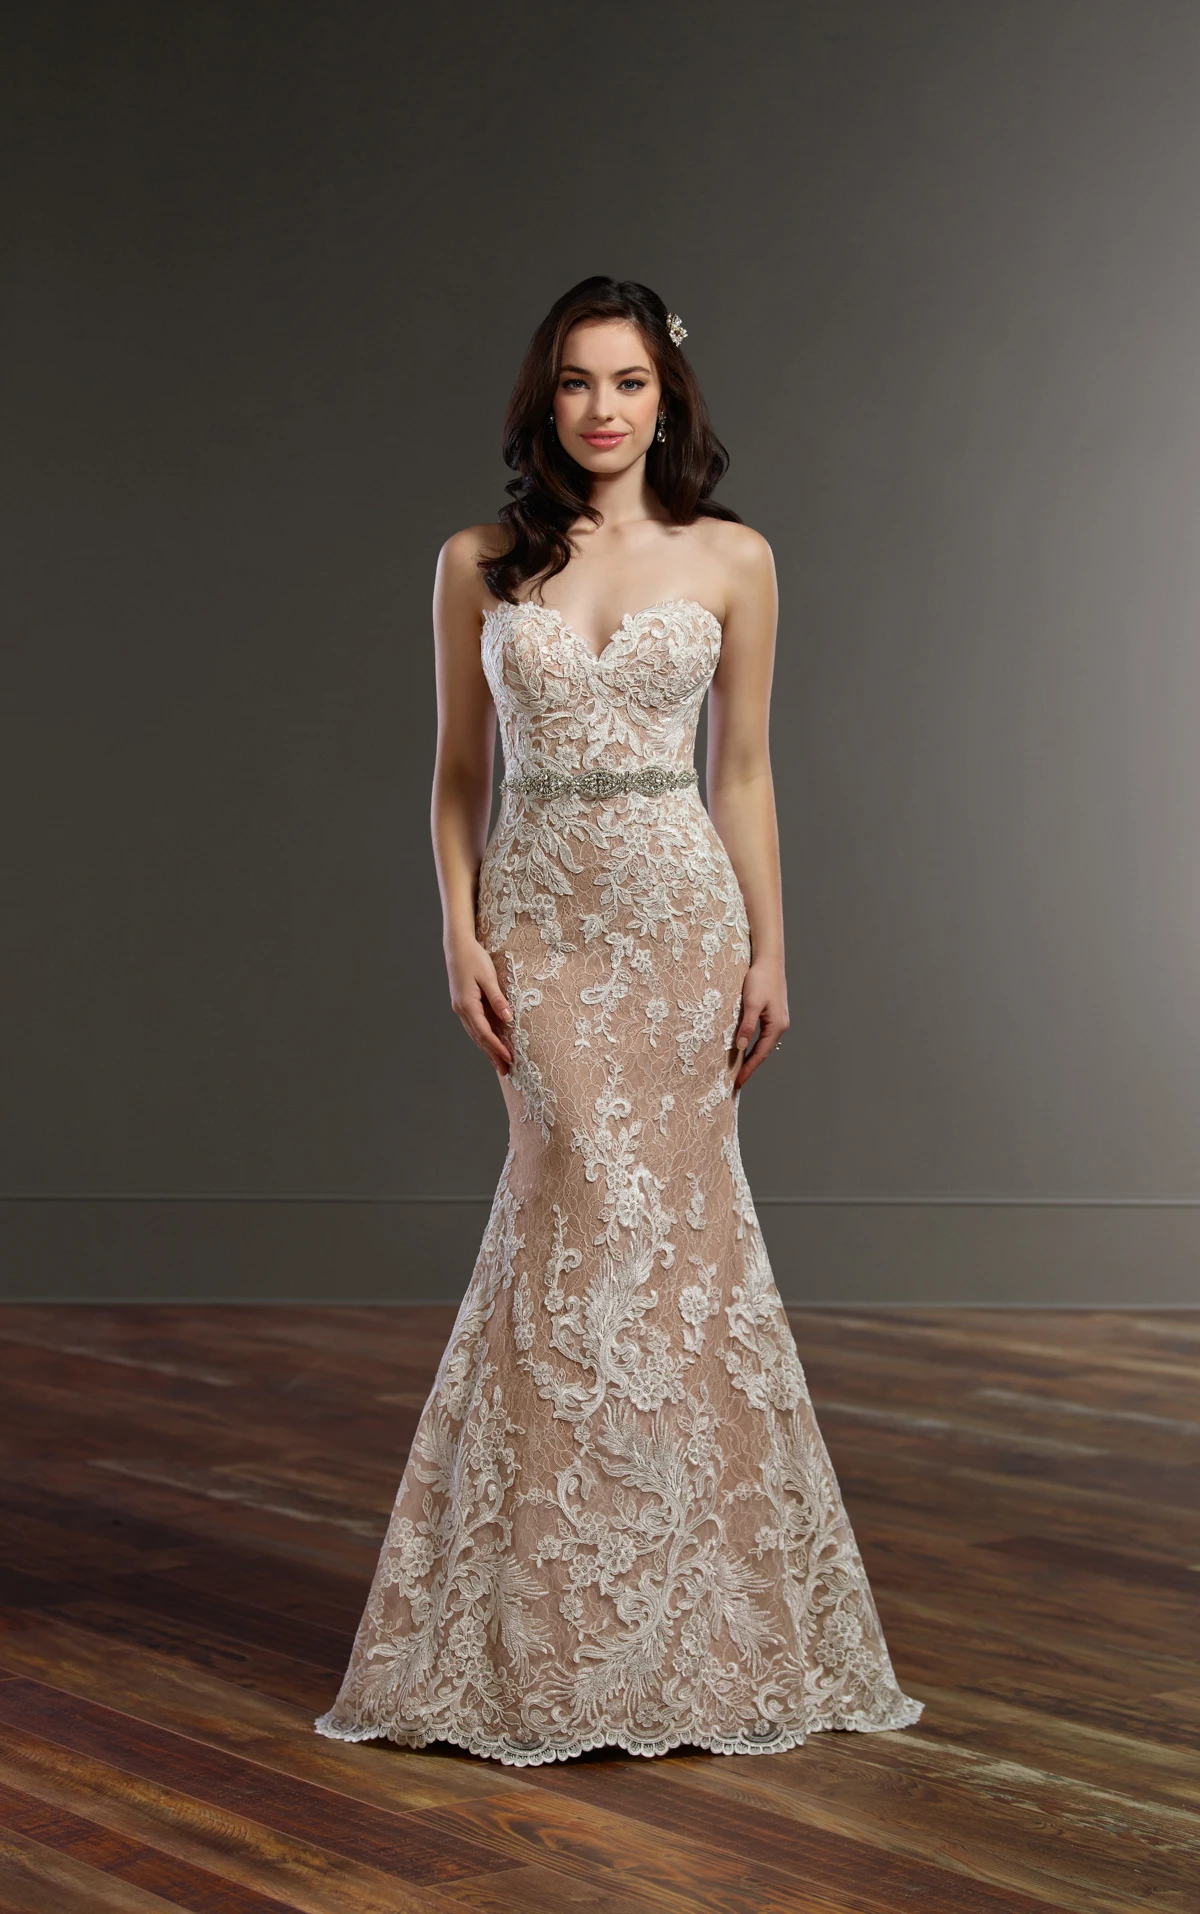 Sweetheart ivory lace nude lining wedding dress from 